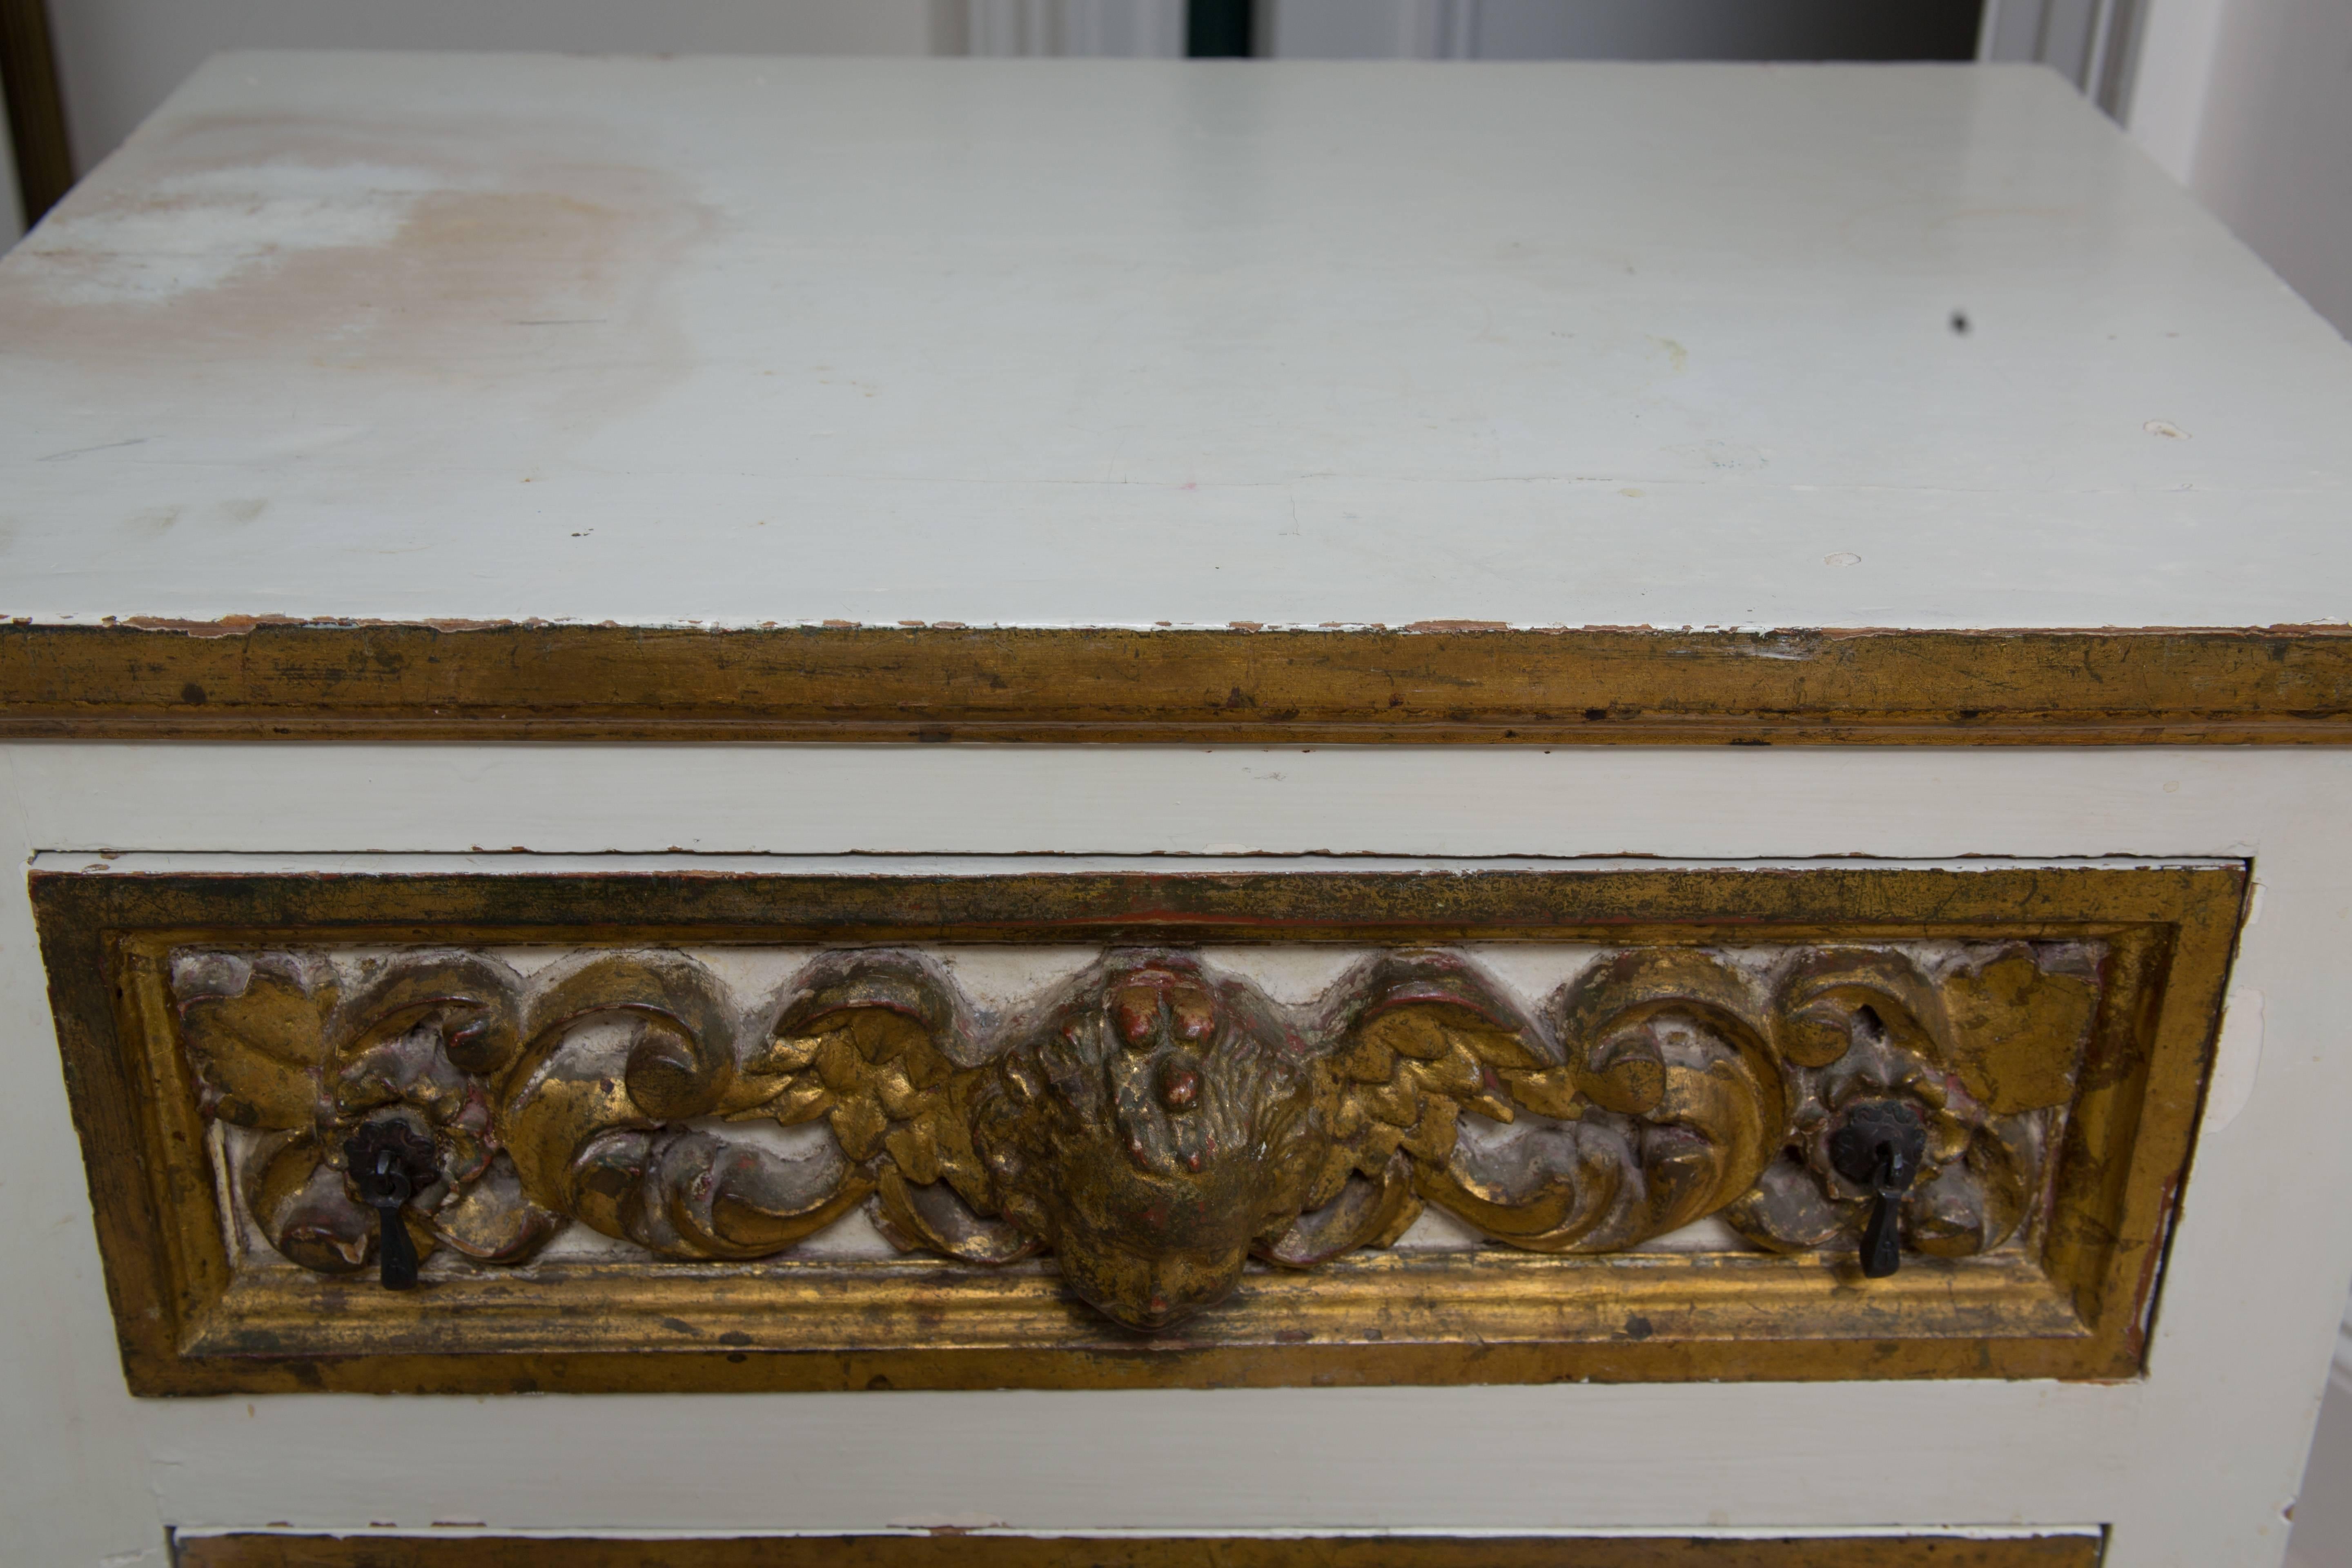 This lovely pair of Italian white painted and parcel-gilt three-drawer chests have drawer faces heavily carved with a central winged mask flanked by scrolls. The sides are designed with raised gilt blocking framed by antique mirror. 19th century.